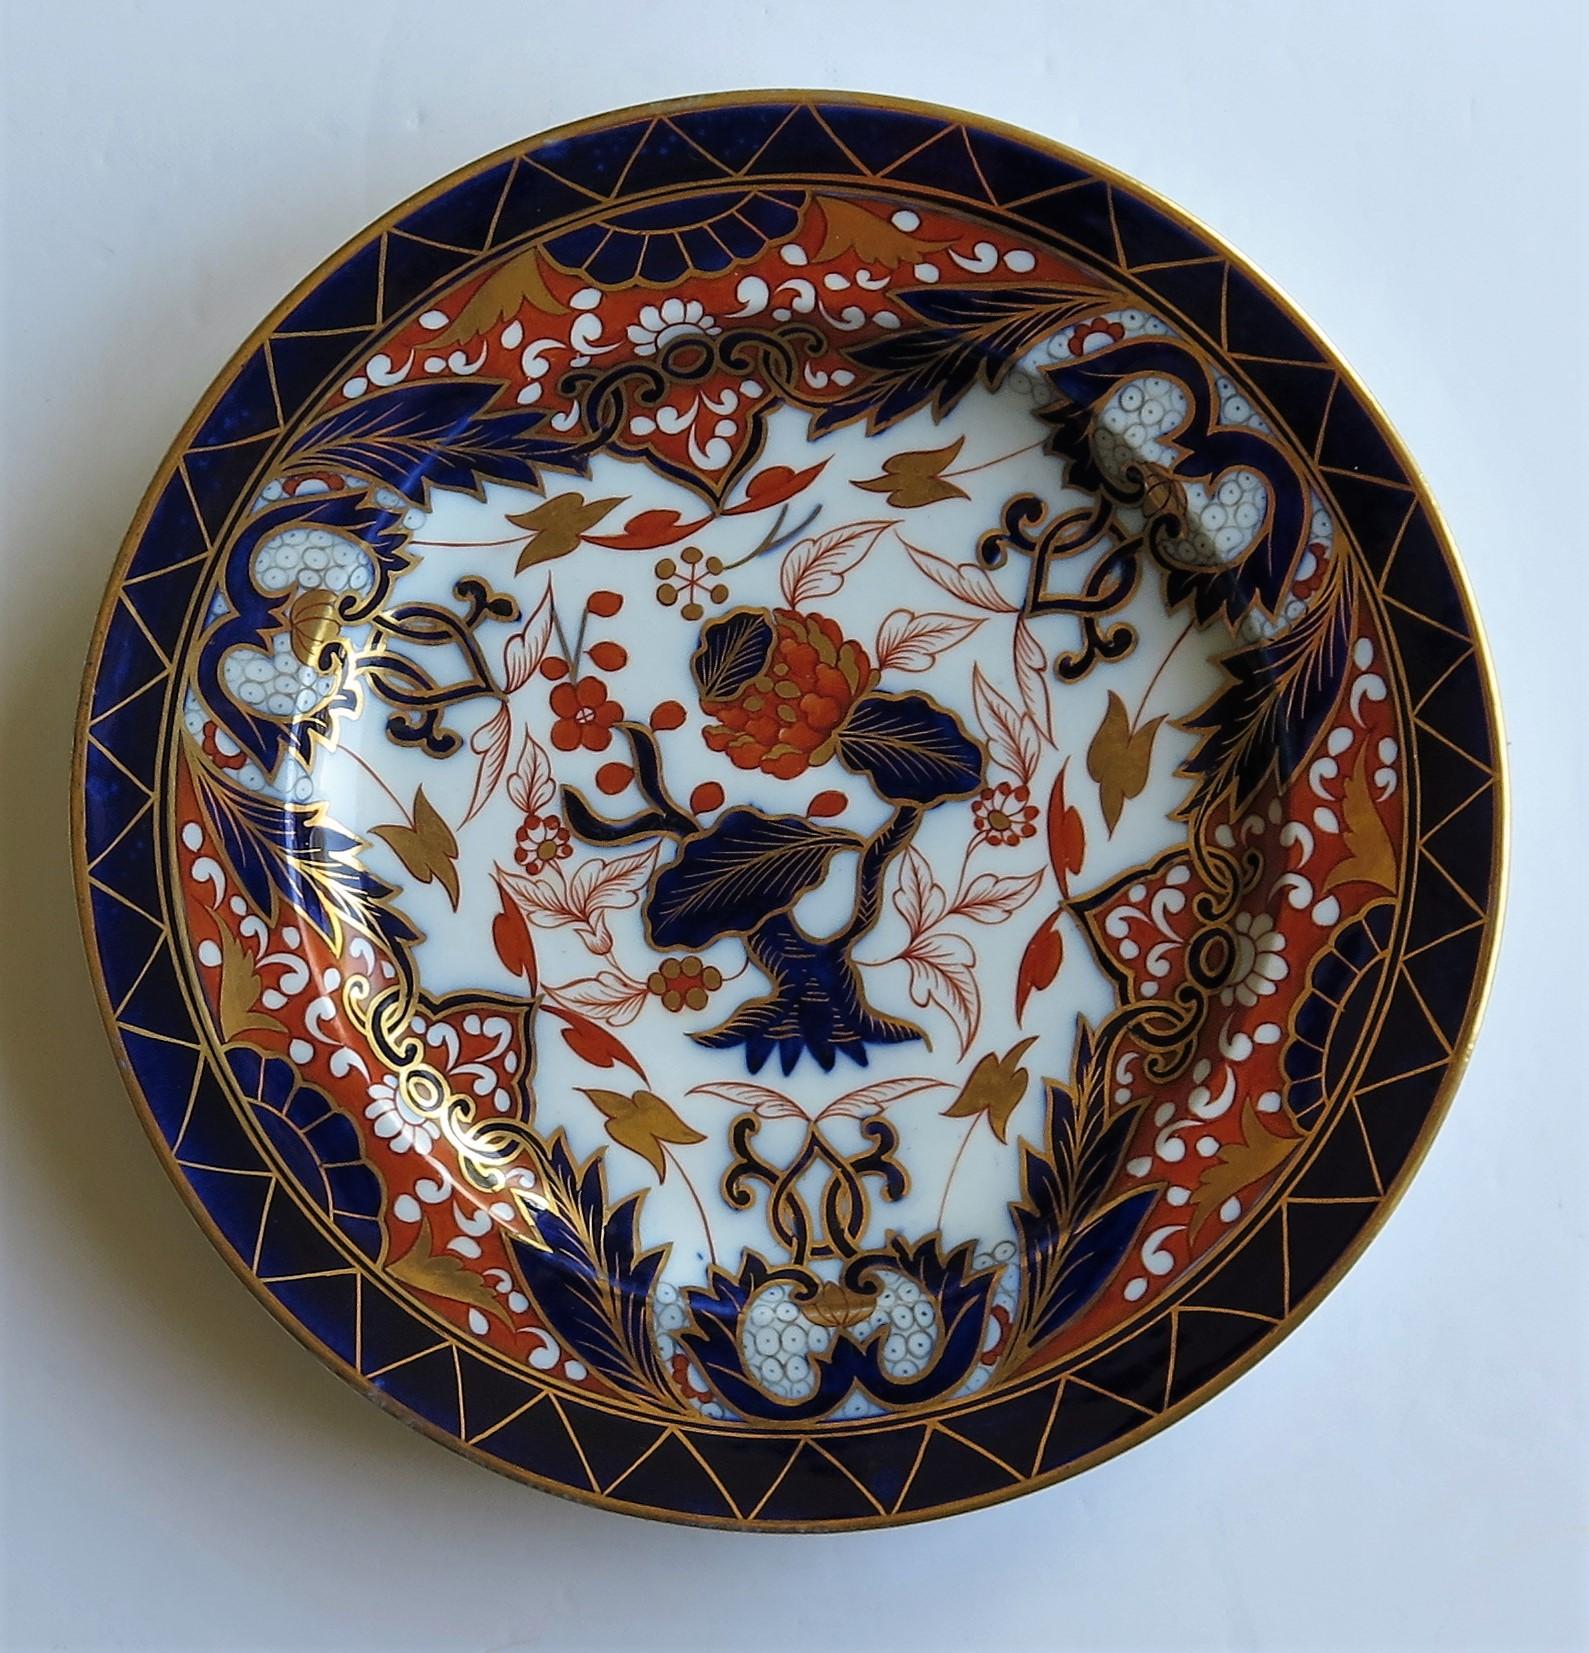 This is a beautiful early porcelain cabinet plate, hand painted in the Imari King's pattern No. 330, and attributed to the Davenport Company of Longport, Staffordshire Potteries, England, dating to early 19th century, Georgian period, circa